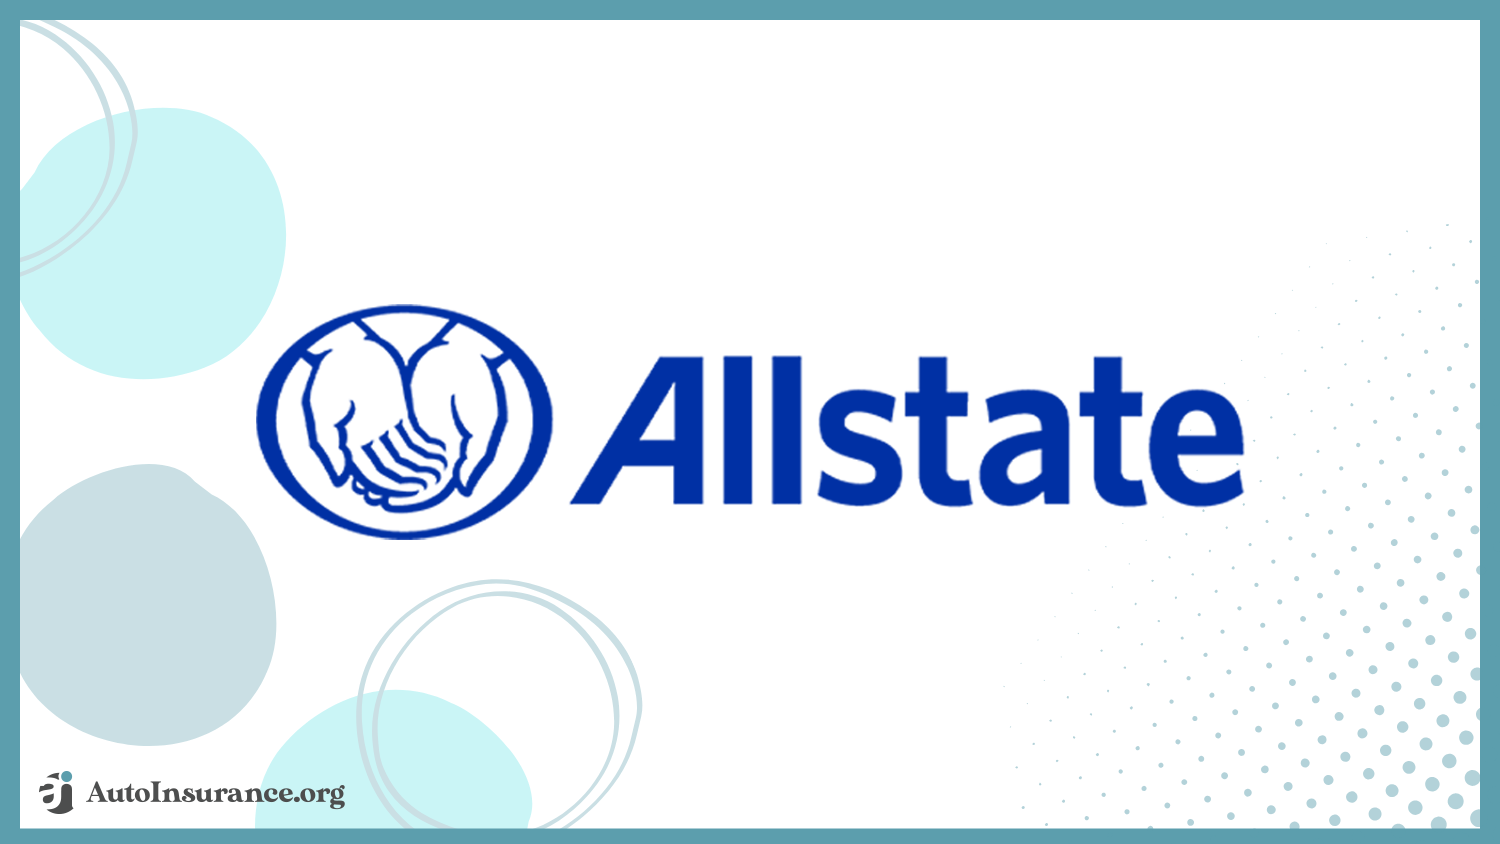 Allstate: Best Auto Insurance for Low-Income Drivers